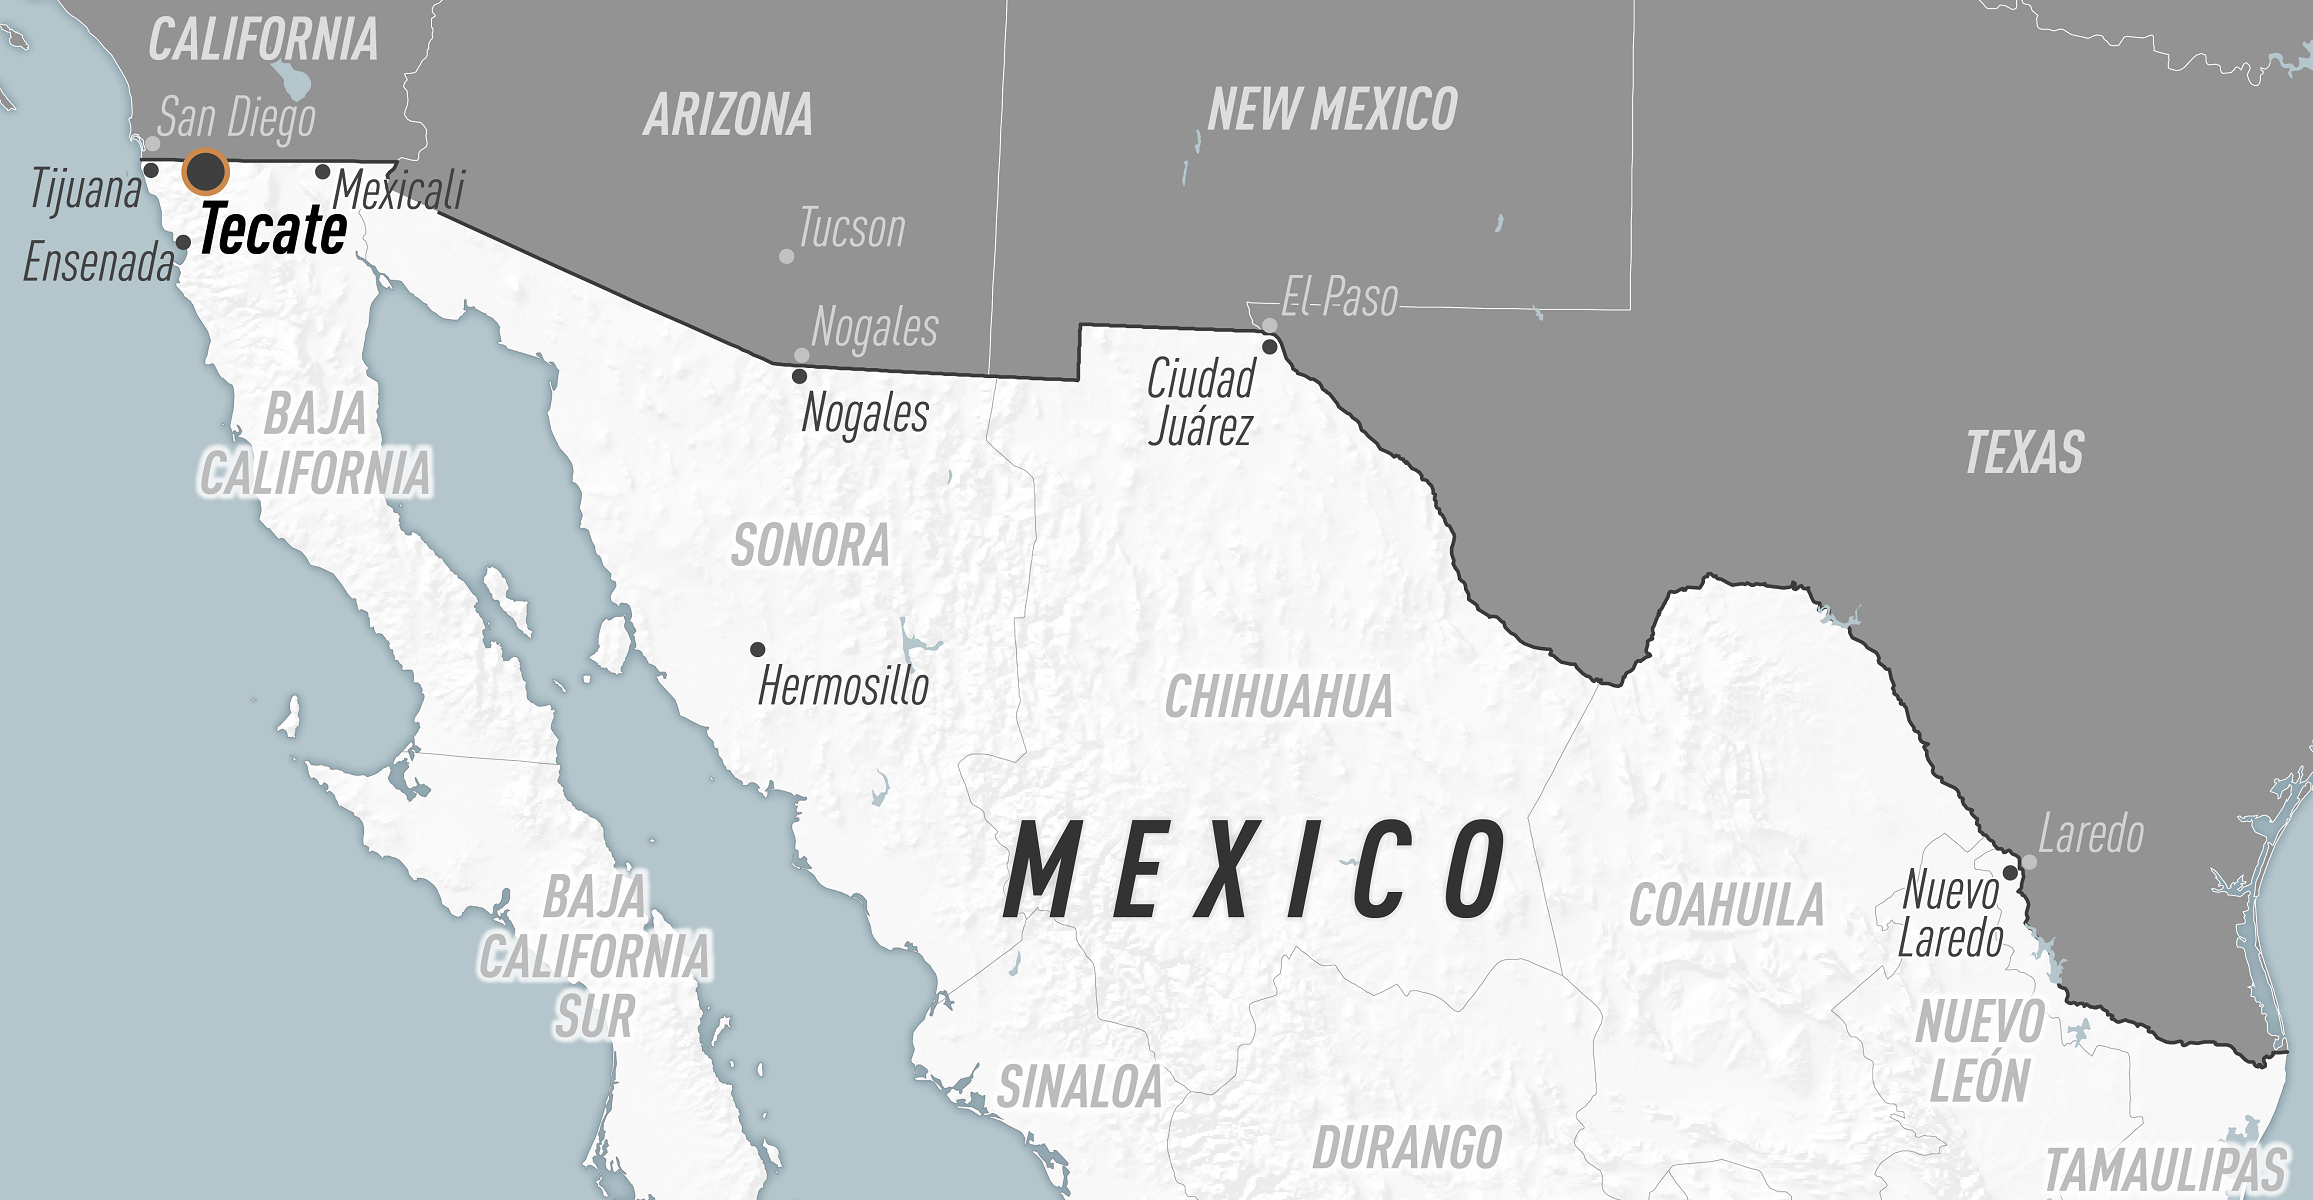 Rocky Mountain spotted fever has been found in urban areas of several states in northern Mexico, including but not limited to Baja California, Sonora, Chihuahua, Coahuila and Nuevo Leon